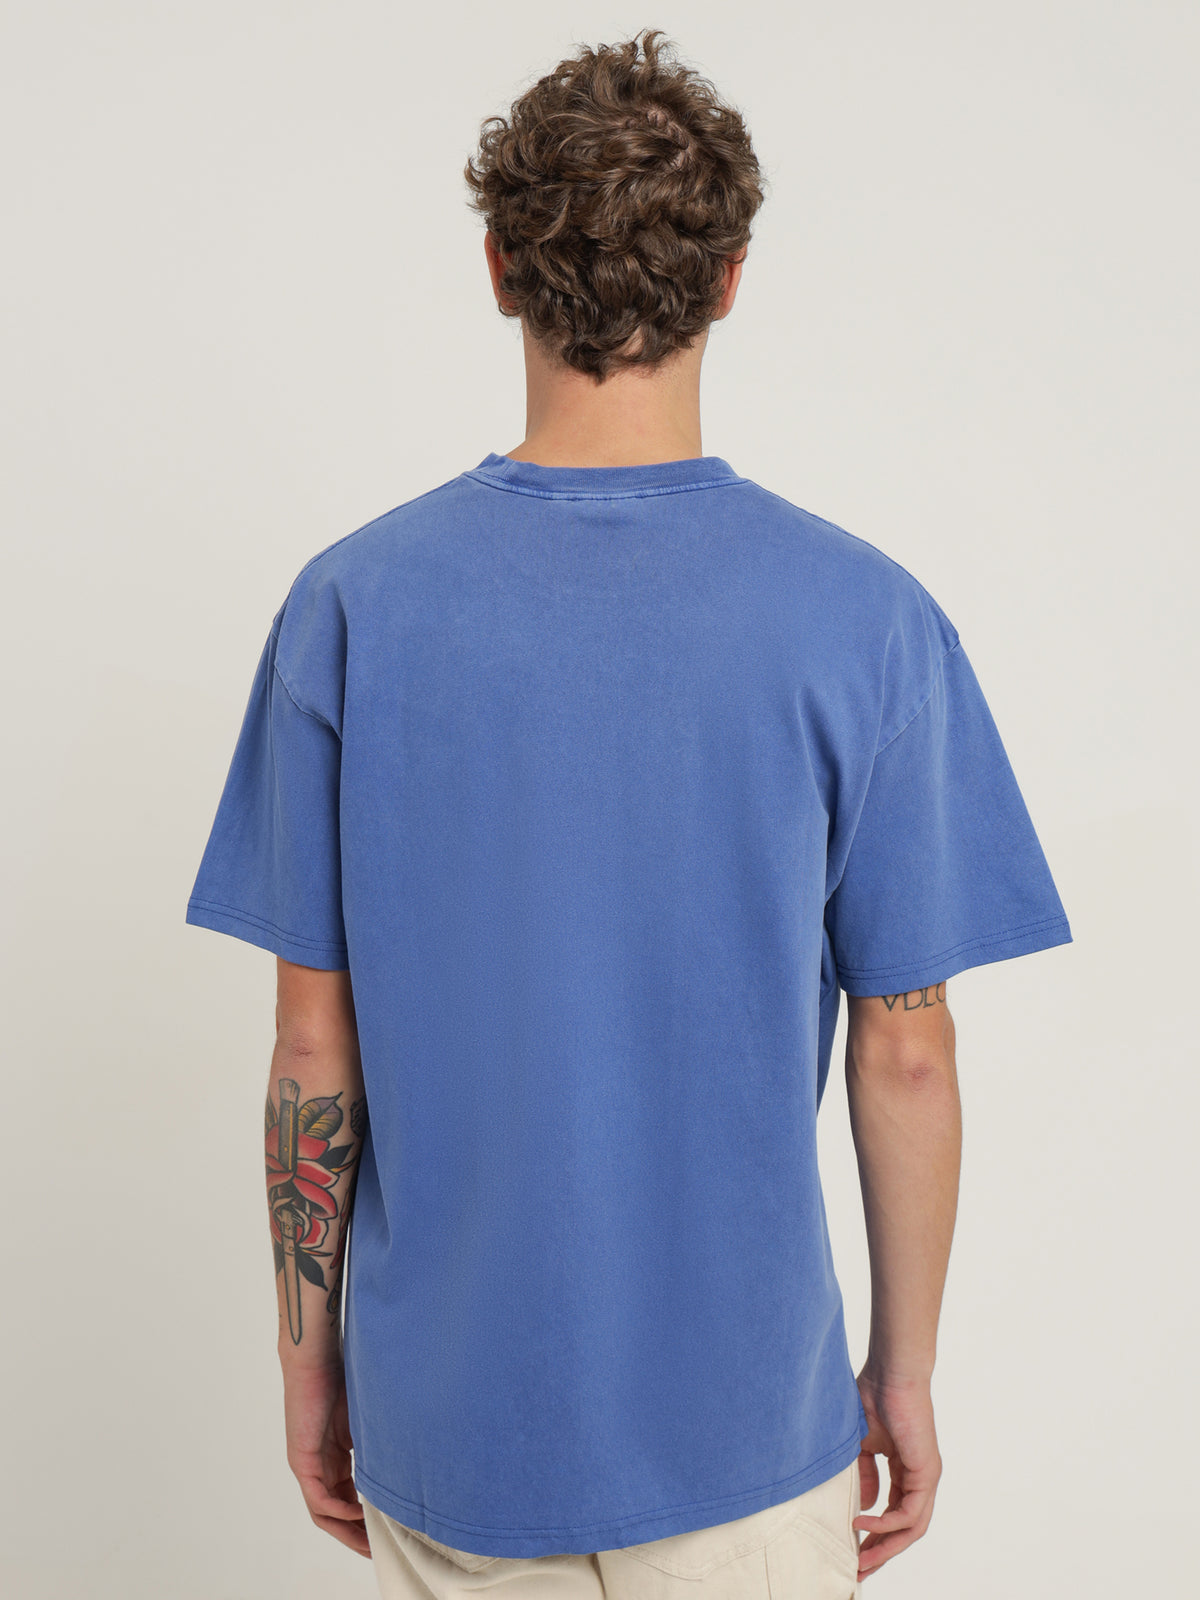 Duster T-Shirt in Navy